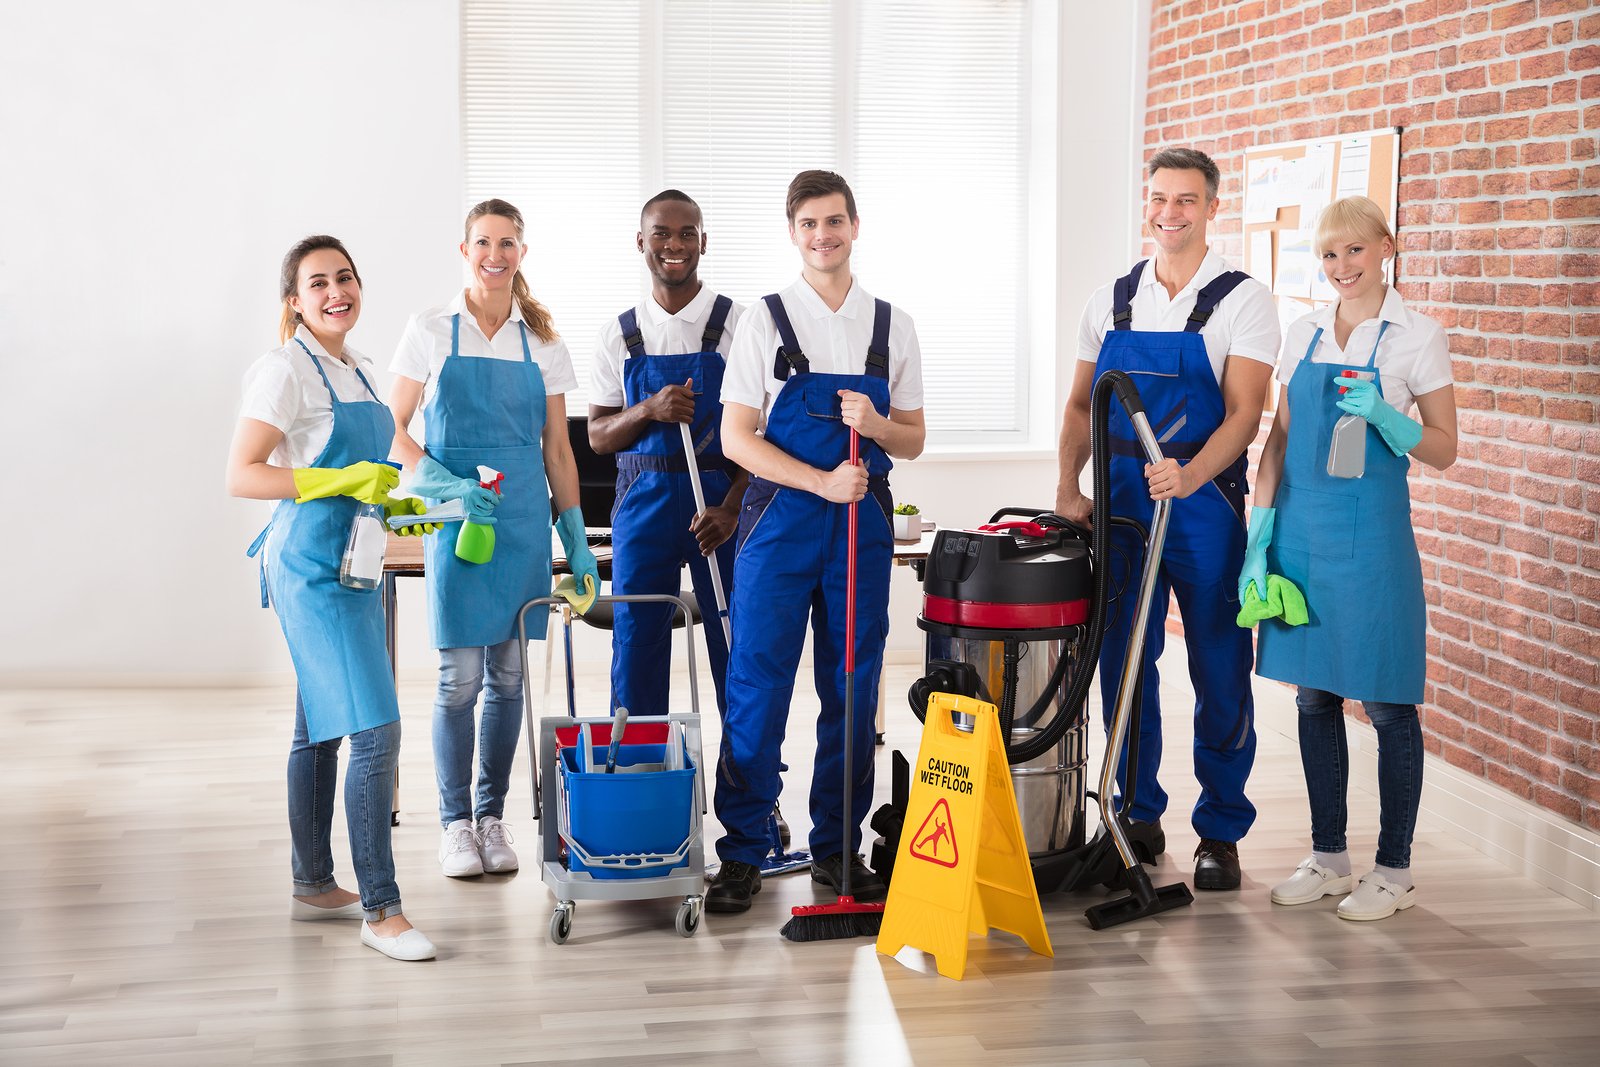 Where To Find A Good Commercial Cleaner